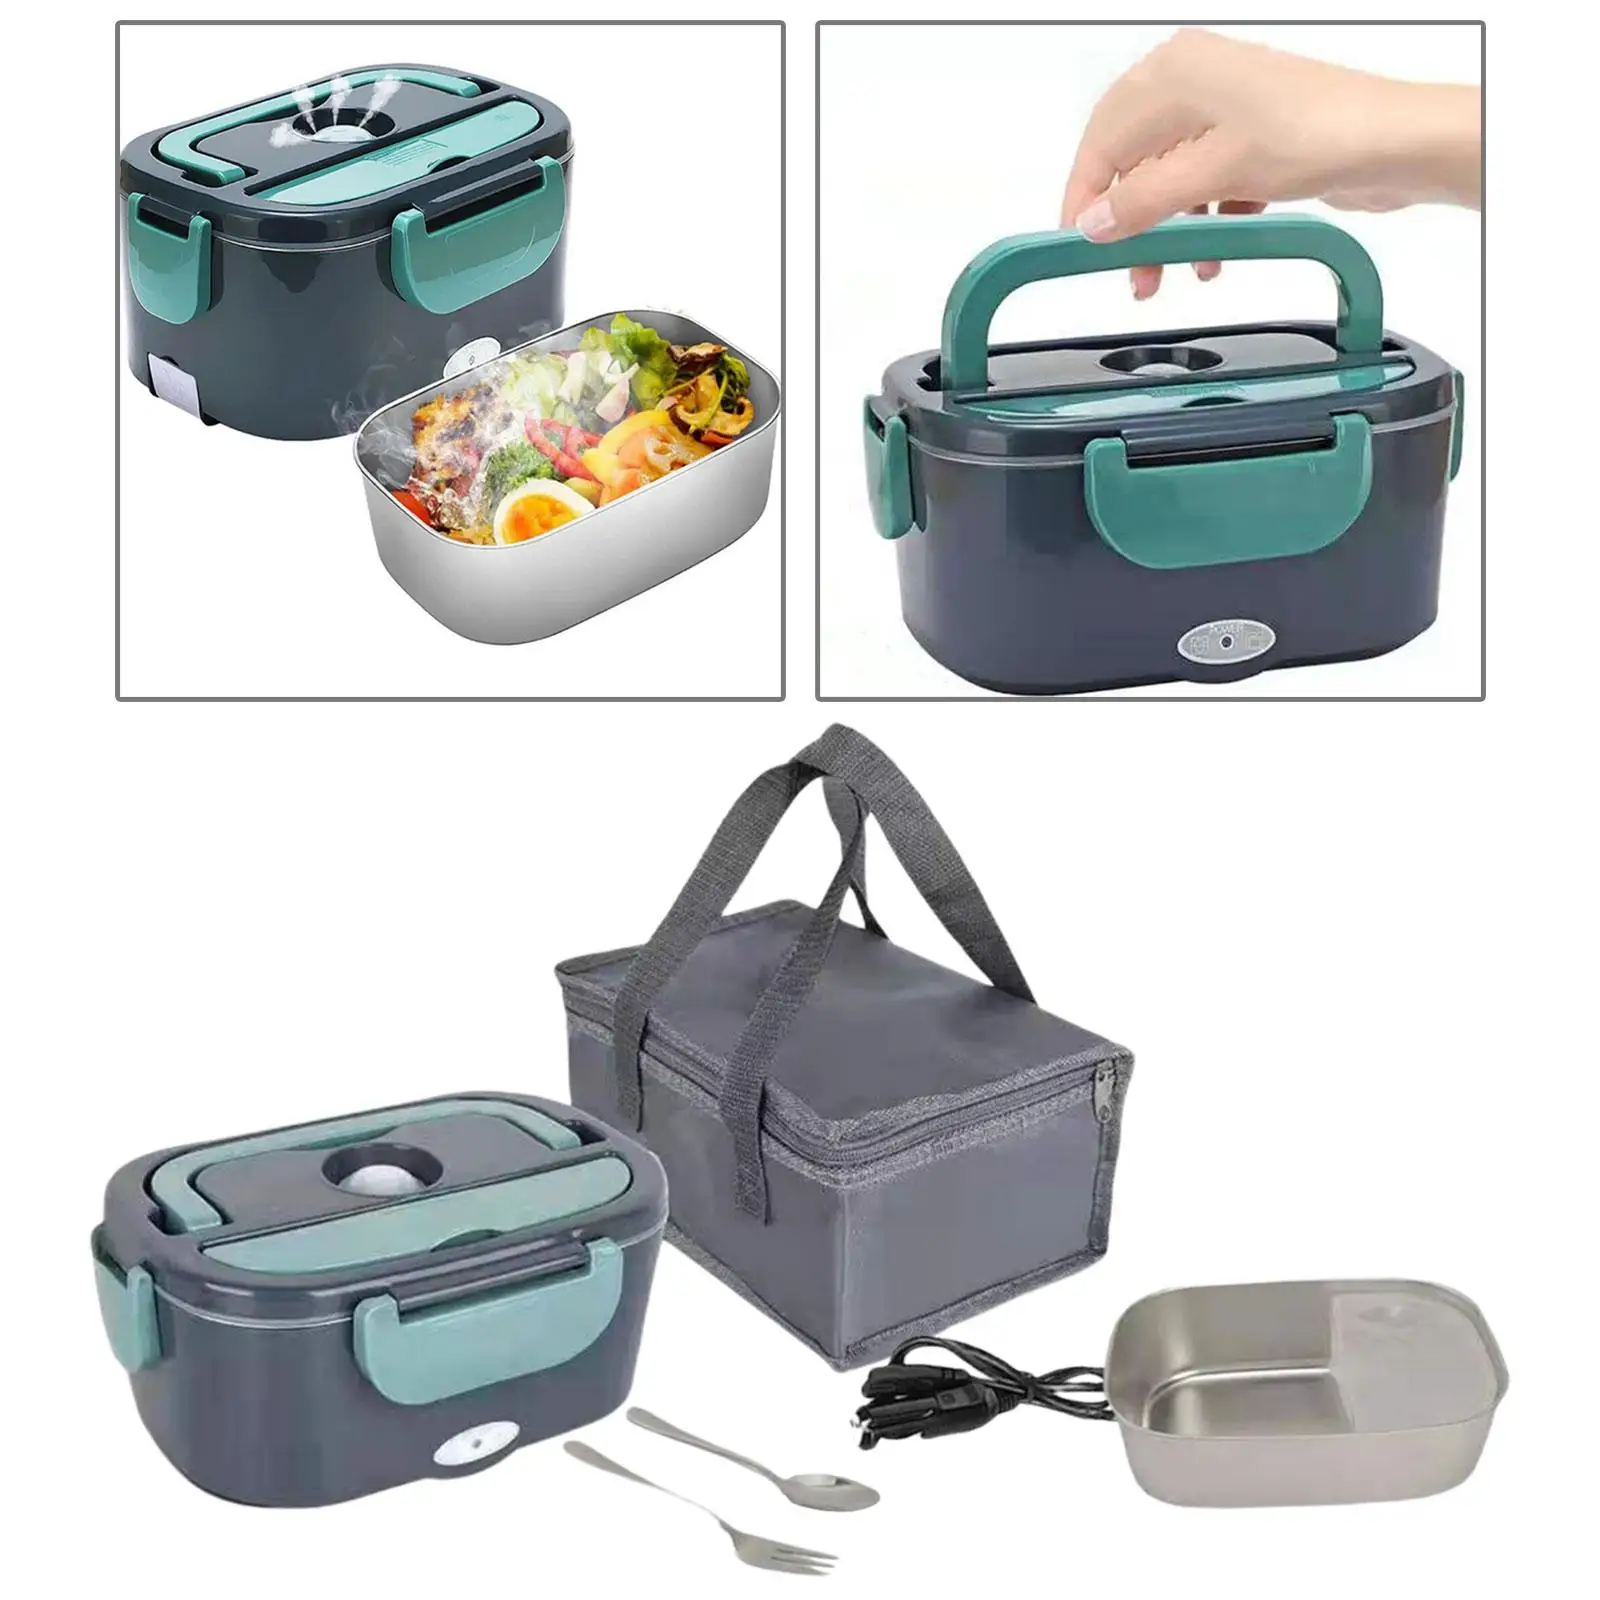 2 in 1 Electric Lunch Box 1.5L 40W with Fork & Spoon Stainless Steel Portable Heating Lunchbox Food Warmer for Home Truck Office